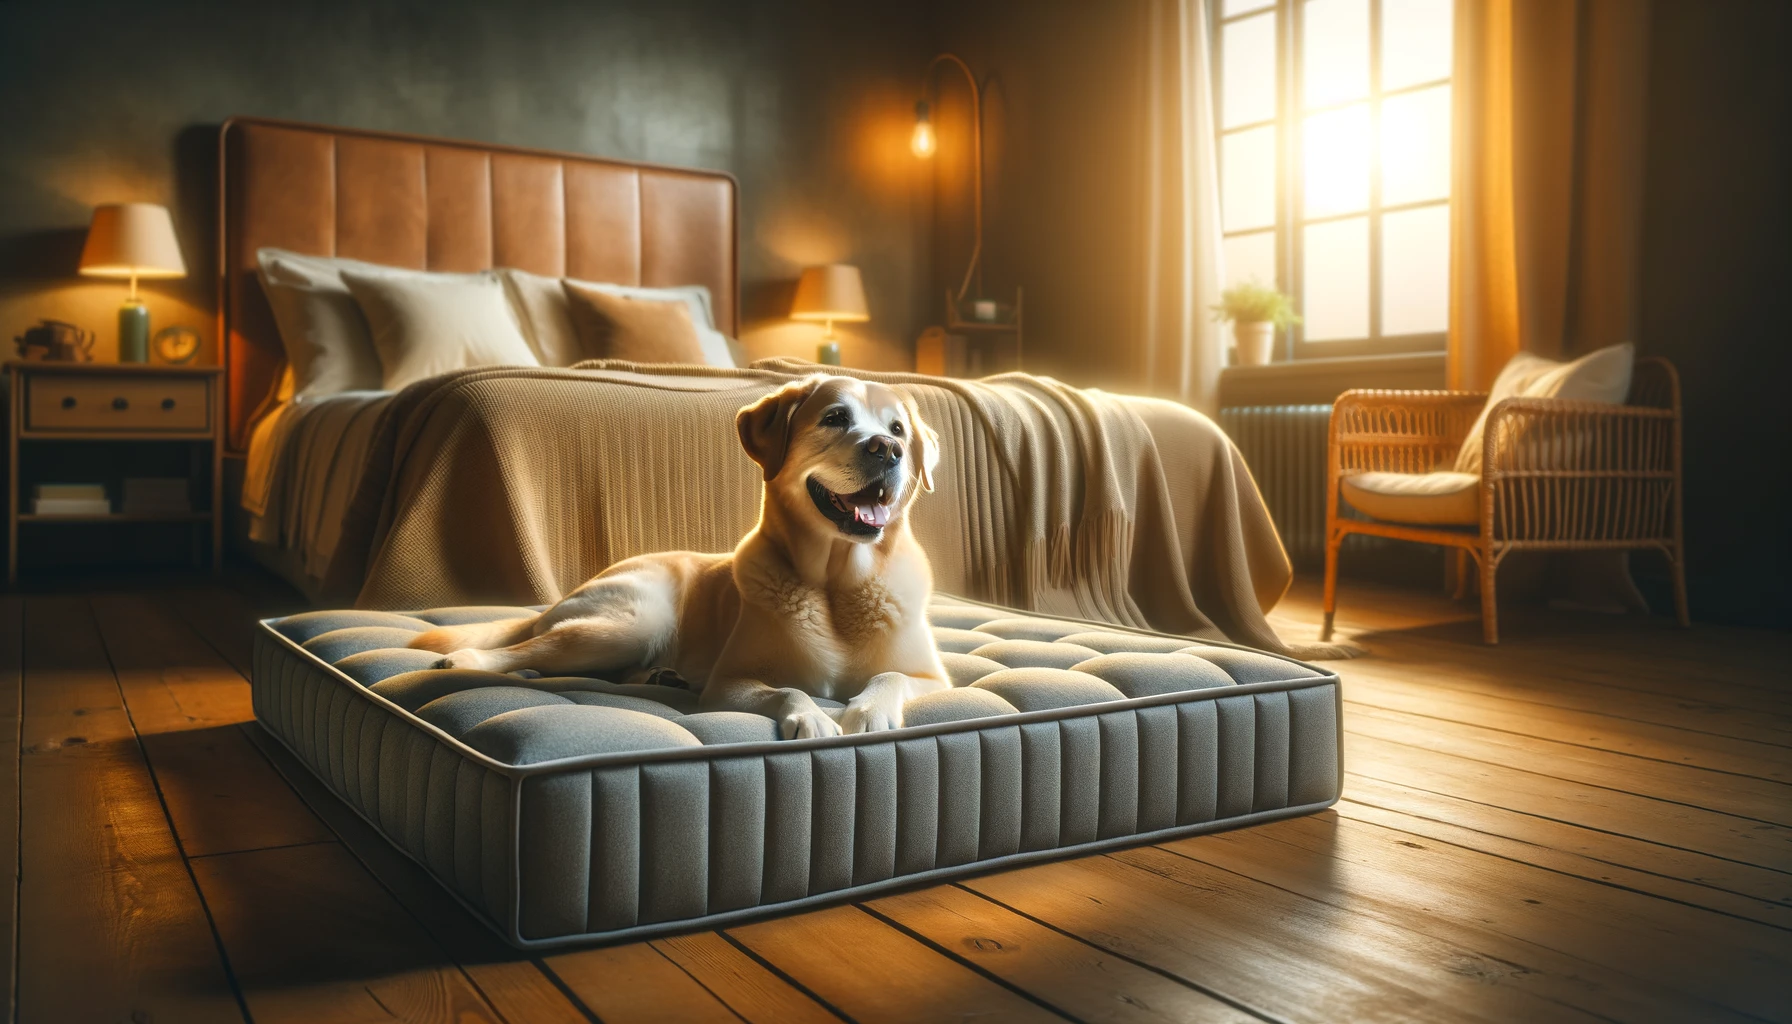 A cozy and inviting bedroom scene with a happy dog lounging comfortably on an orthopedic bed, designed to highlight the bed's supportive and therapeut